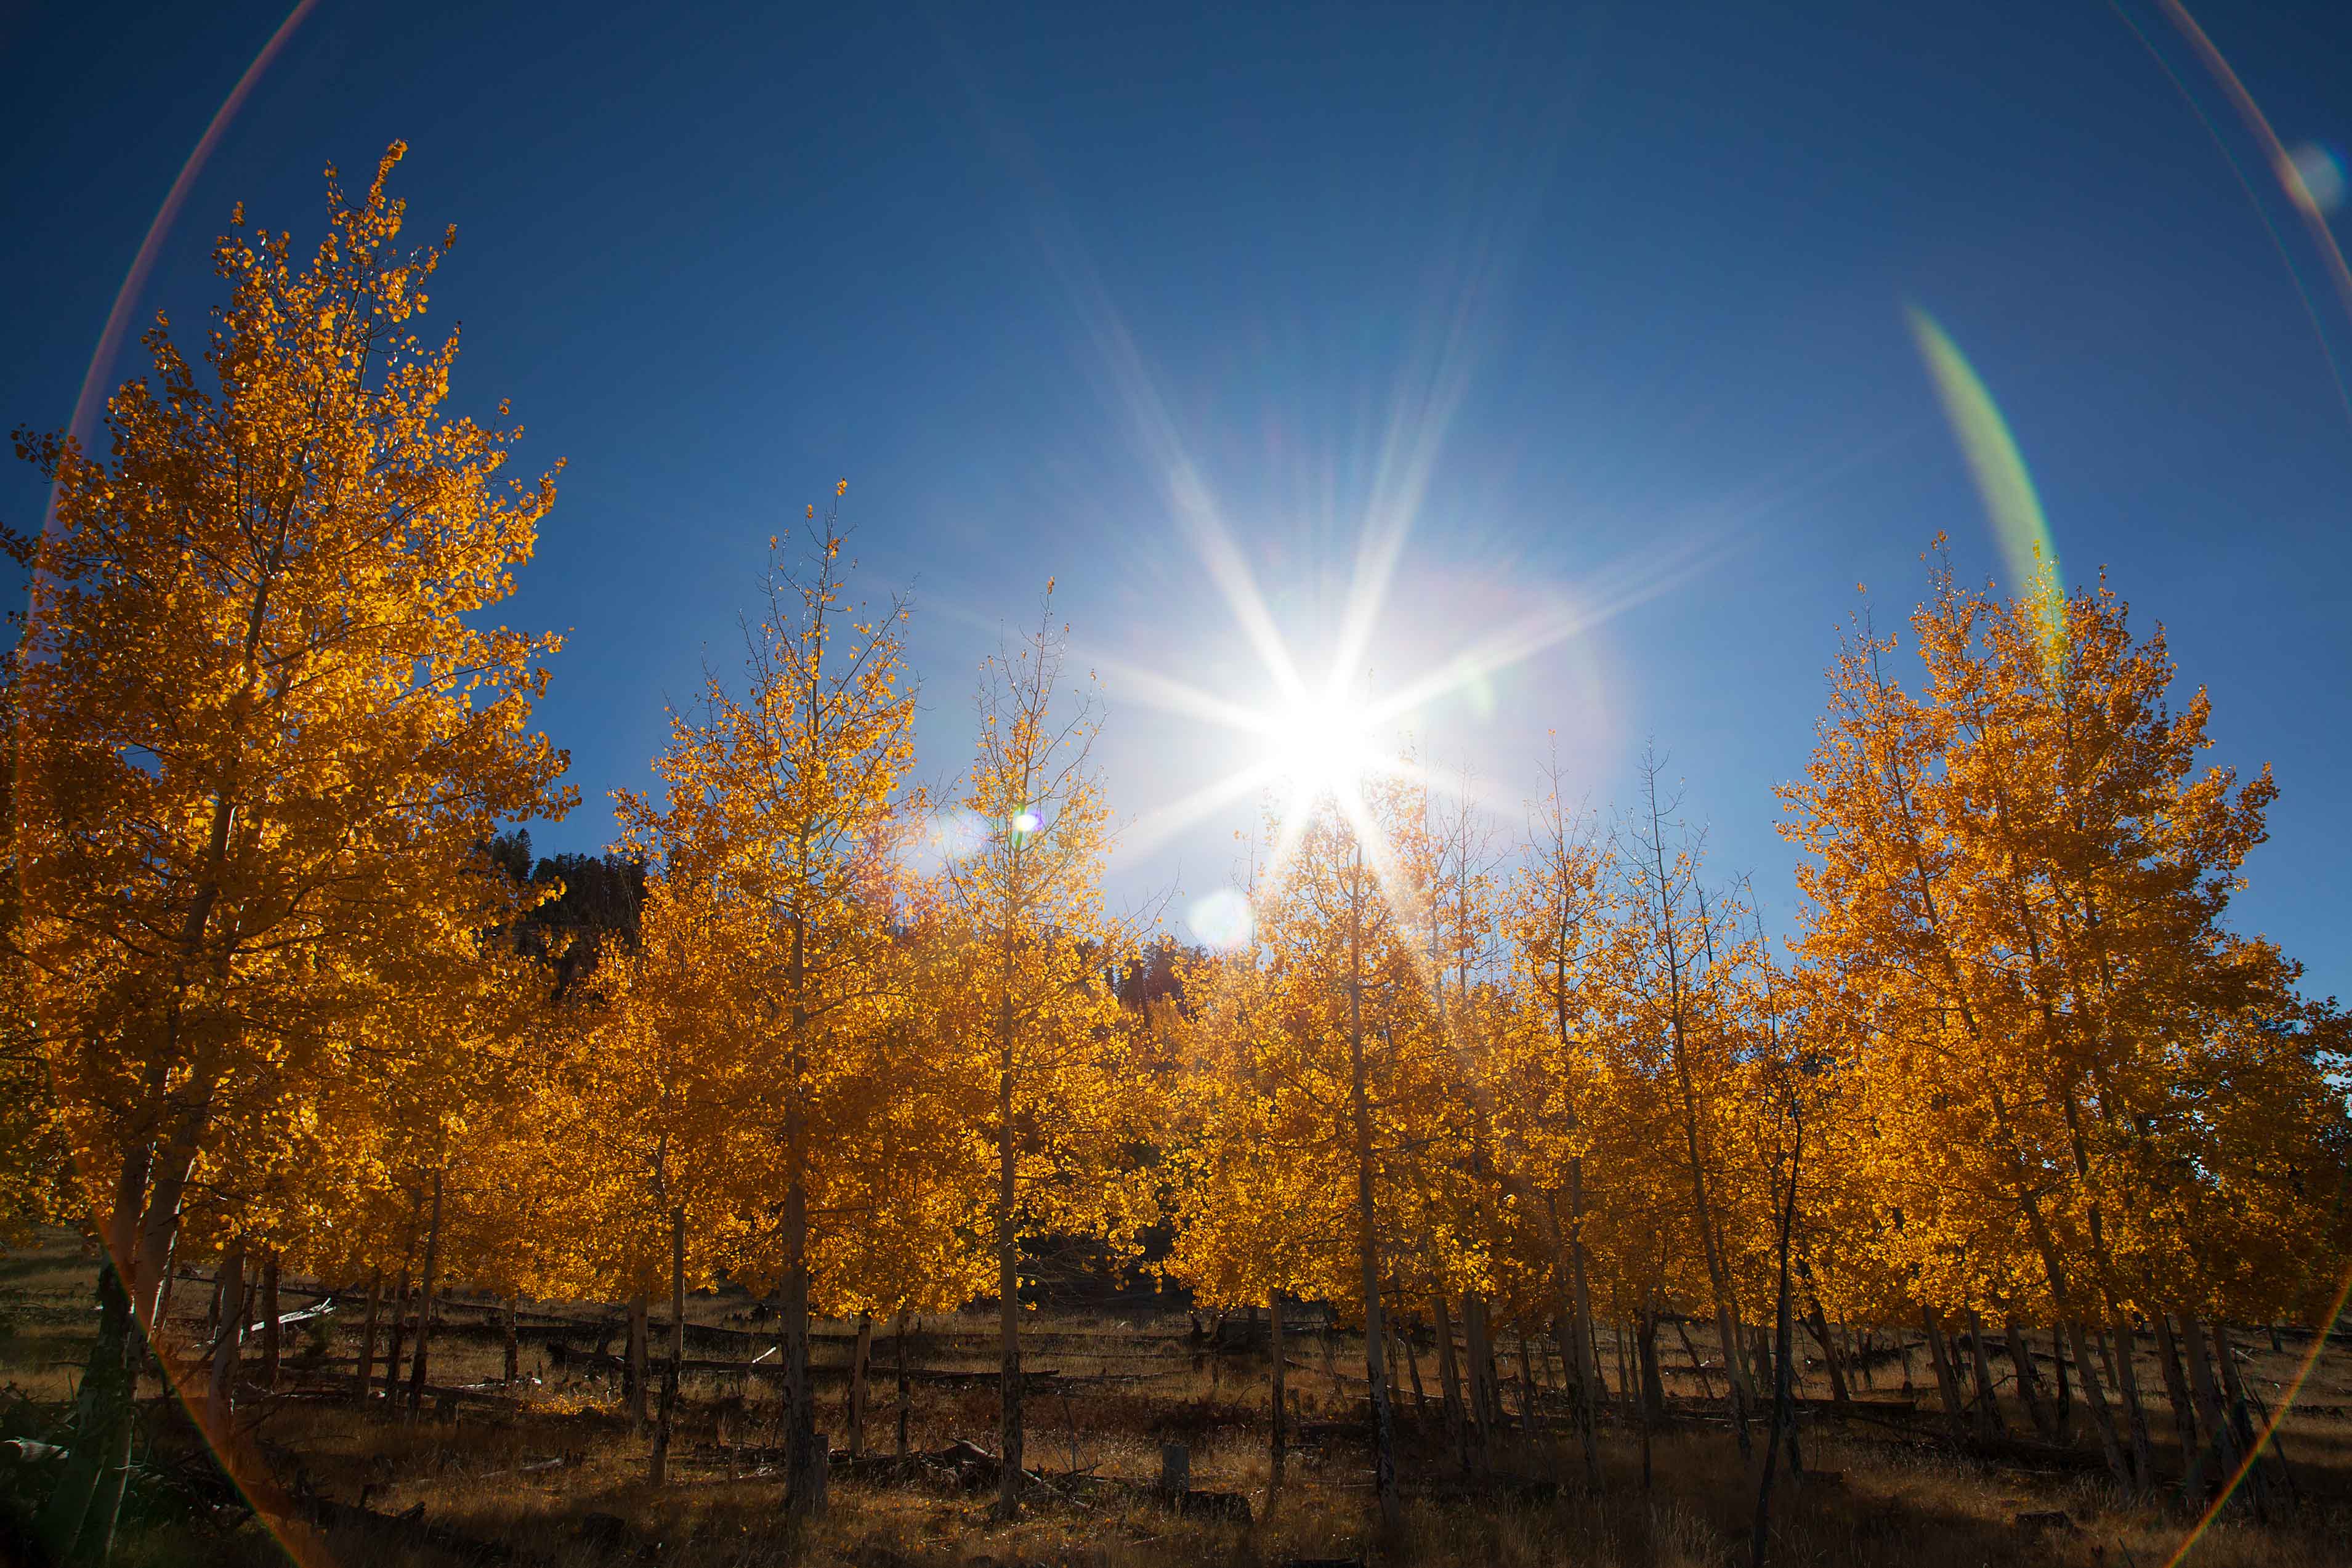 Autumn aspens with circular lens flairs (glare) in the San Francisco Peaks of northern Arizona